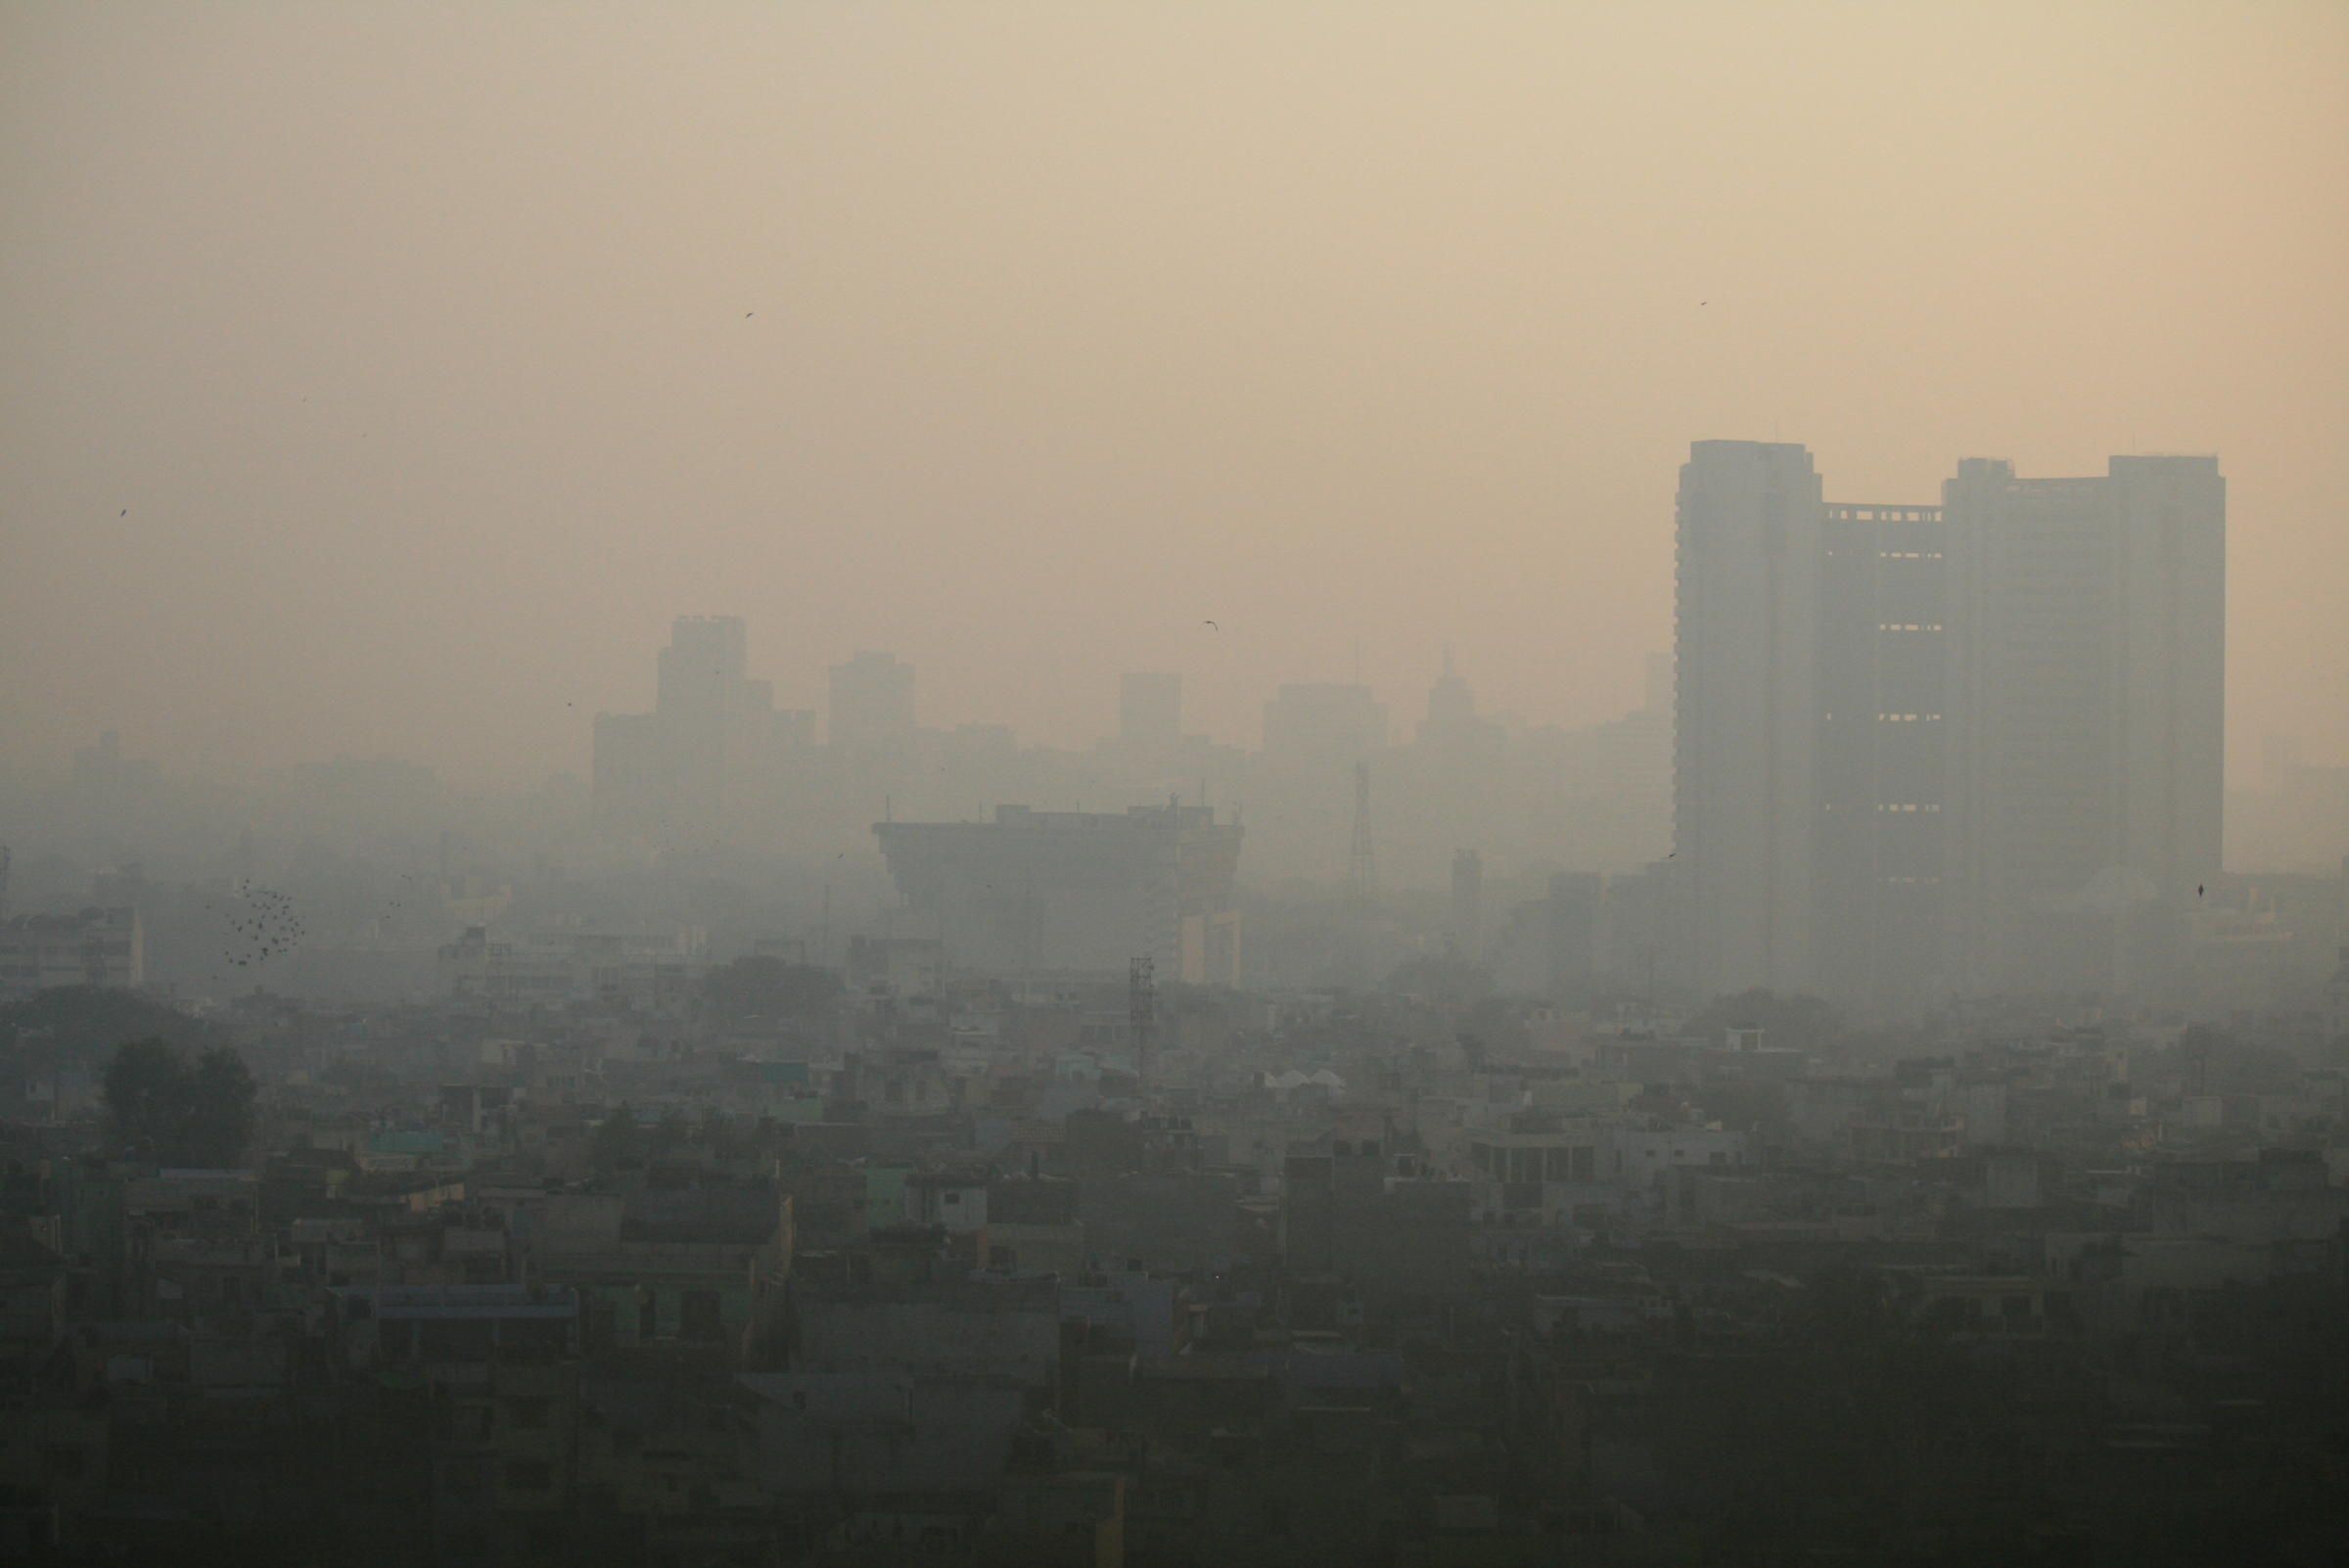 Air pollution management: Delhi to get 'green' funds under NCAP, 1st time since it began